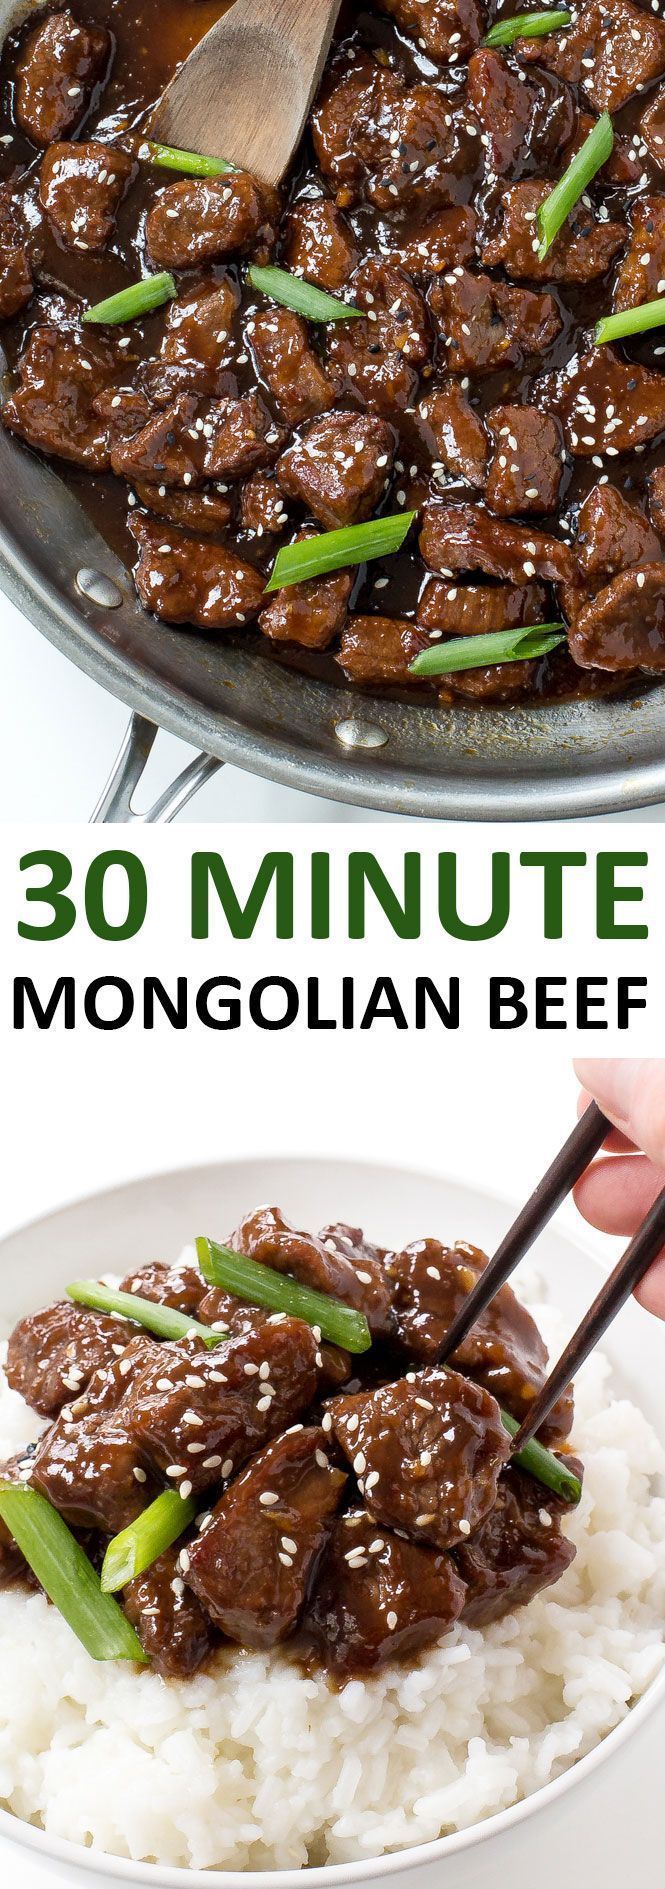 Amazing 30 Minute Mongolian Beef. Tender flank steak fried and tossed in a thick Asian inspired sauce. Way better than takeout! |